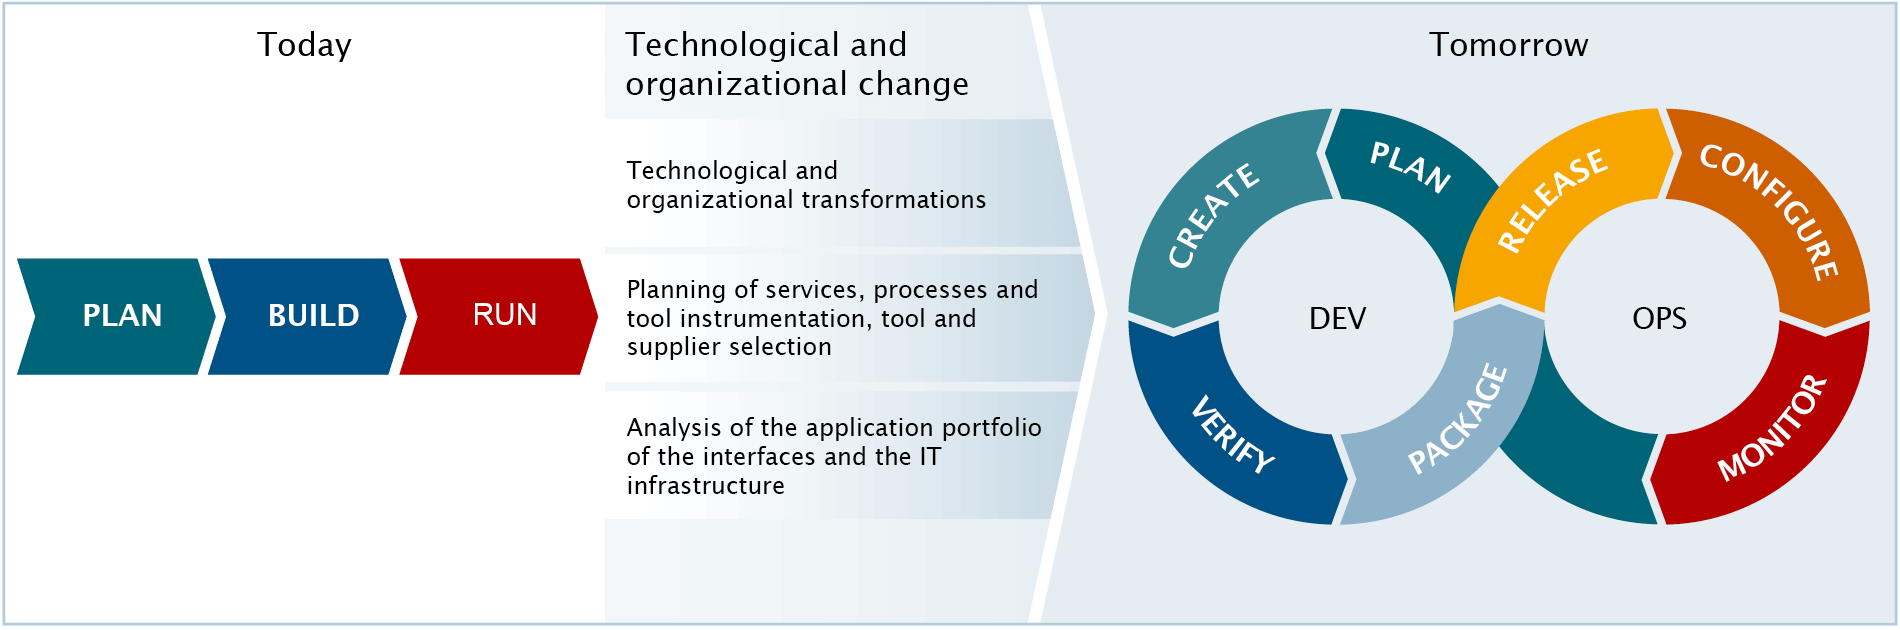 Technological and 
organizational change